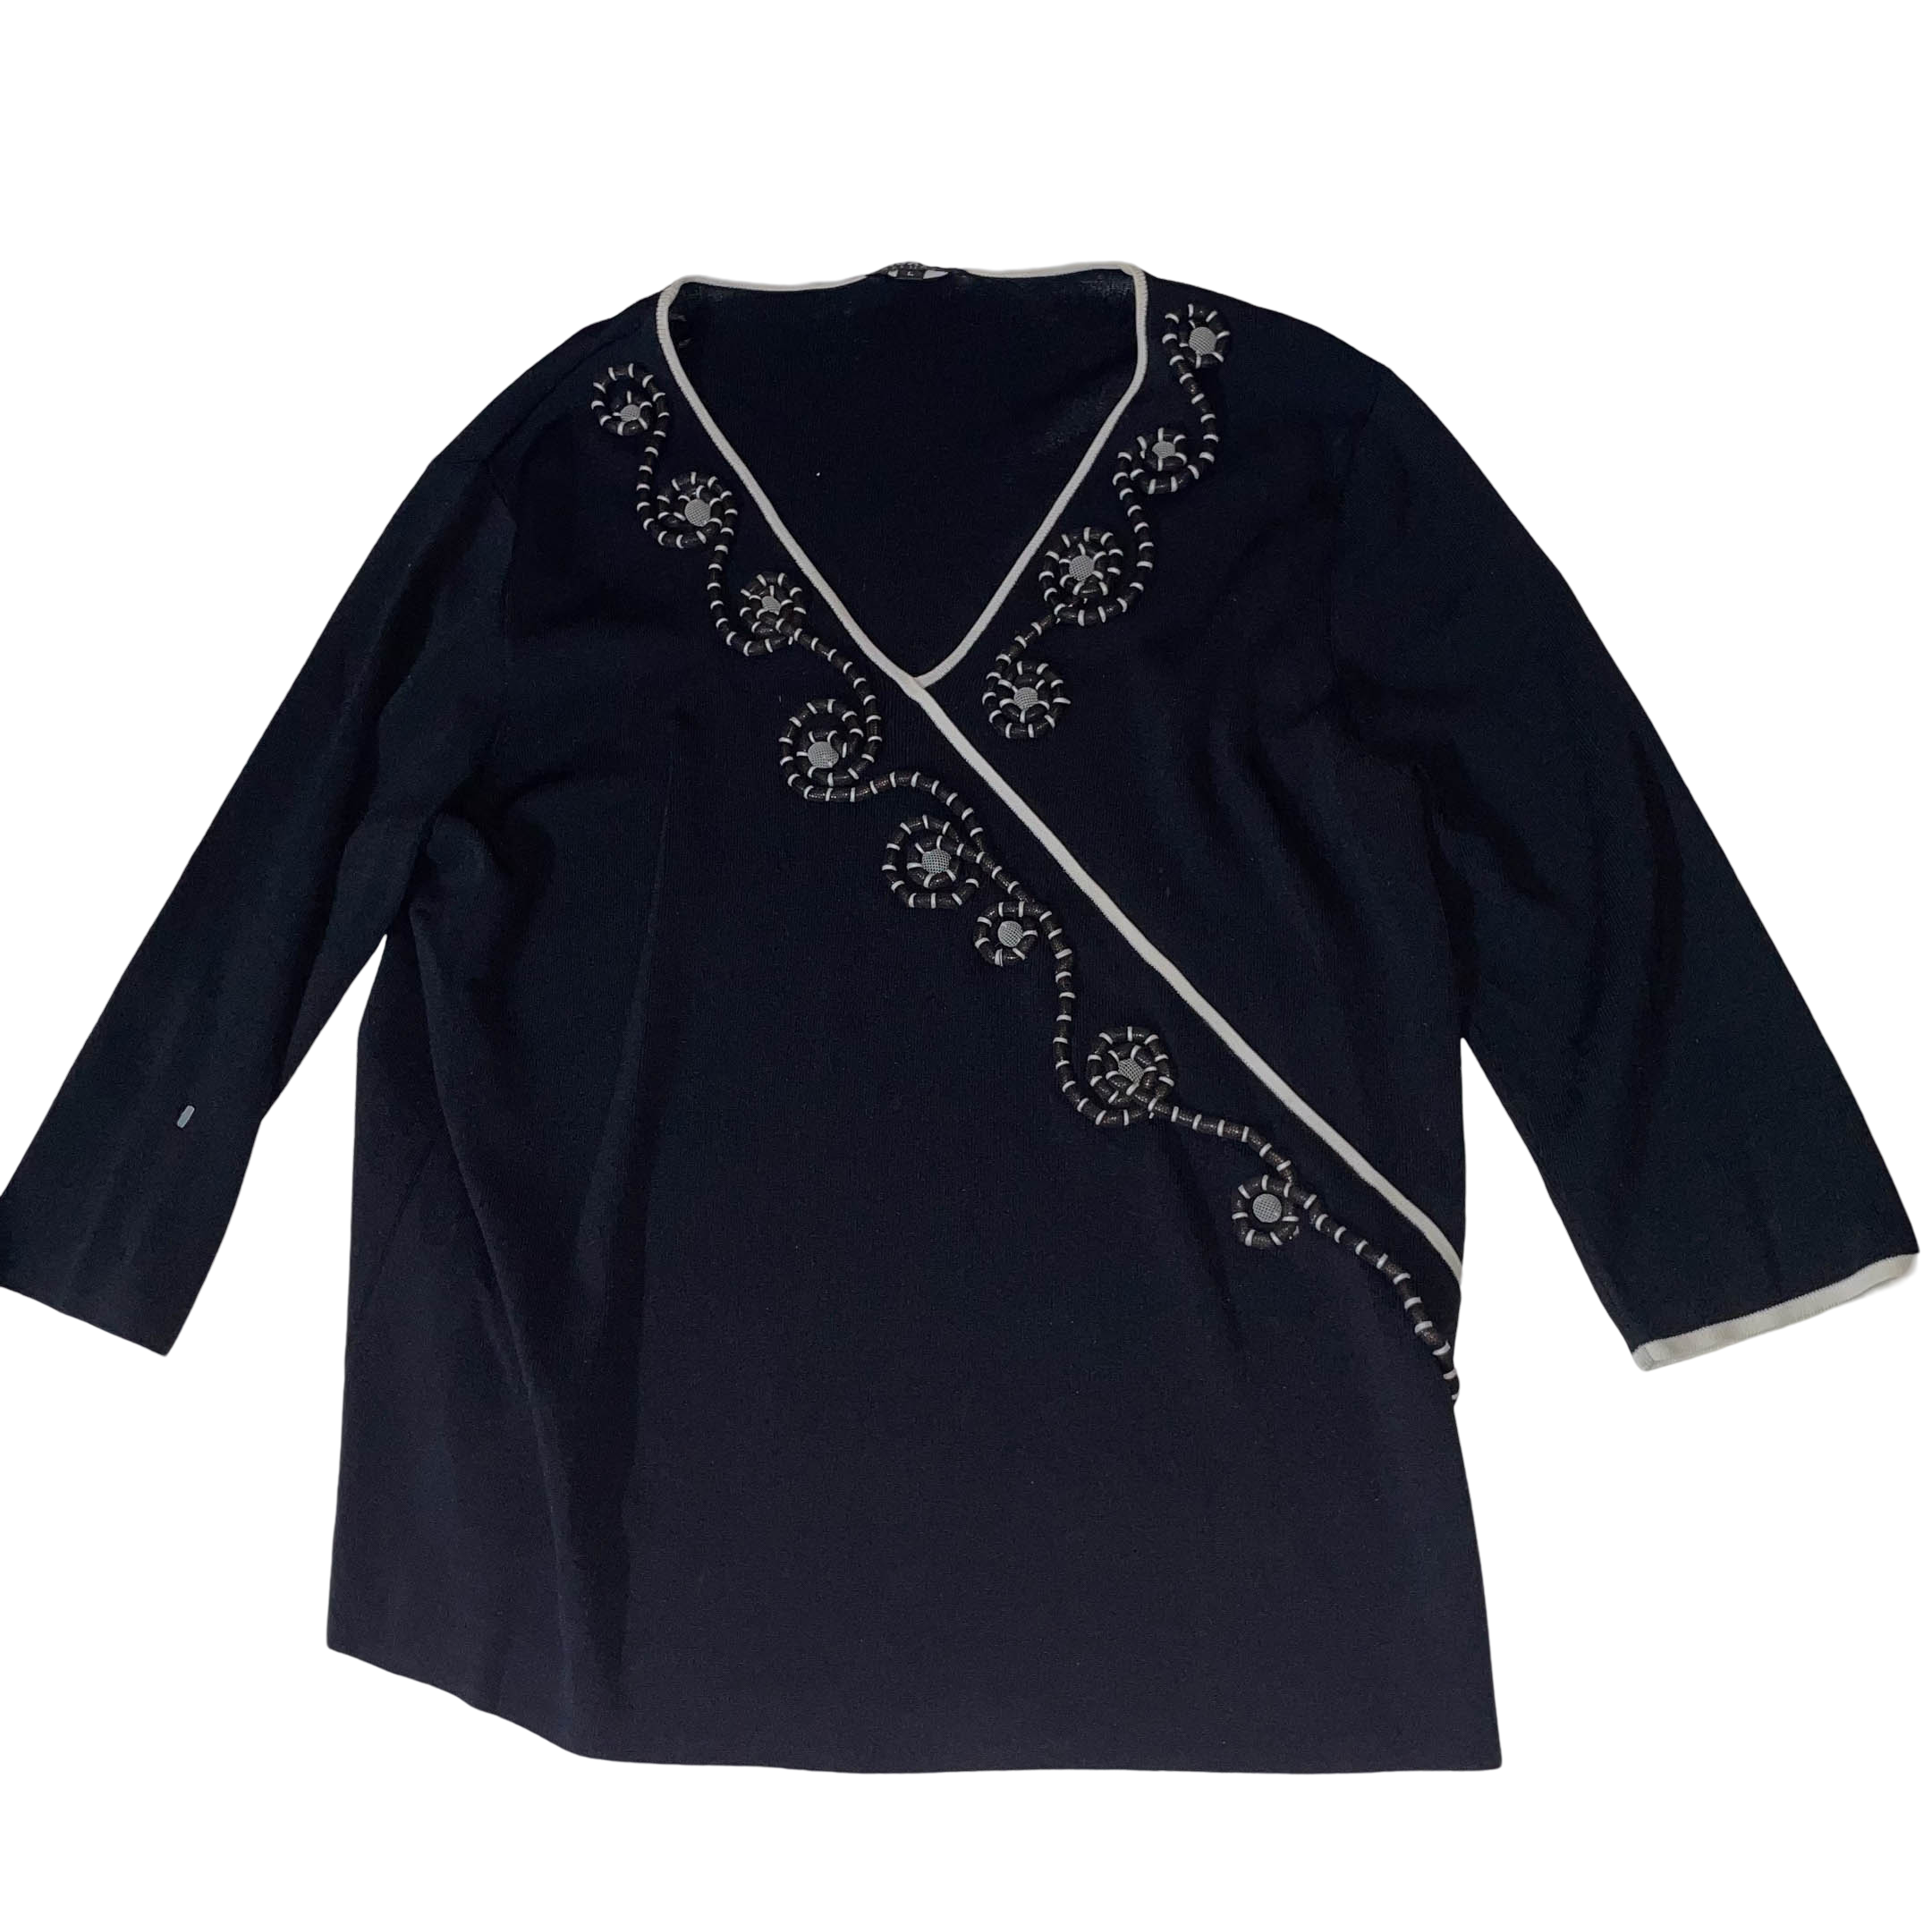 Vintage Casamia exclusive women's black V-neck embroidery blouse in L| SKU 3721